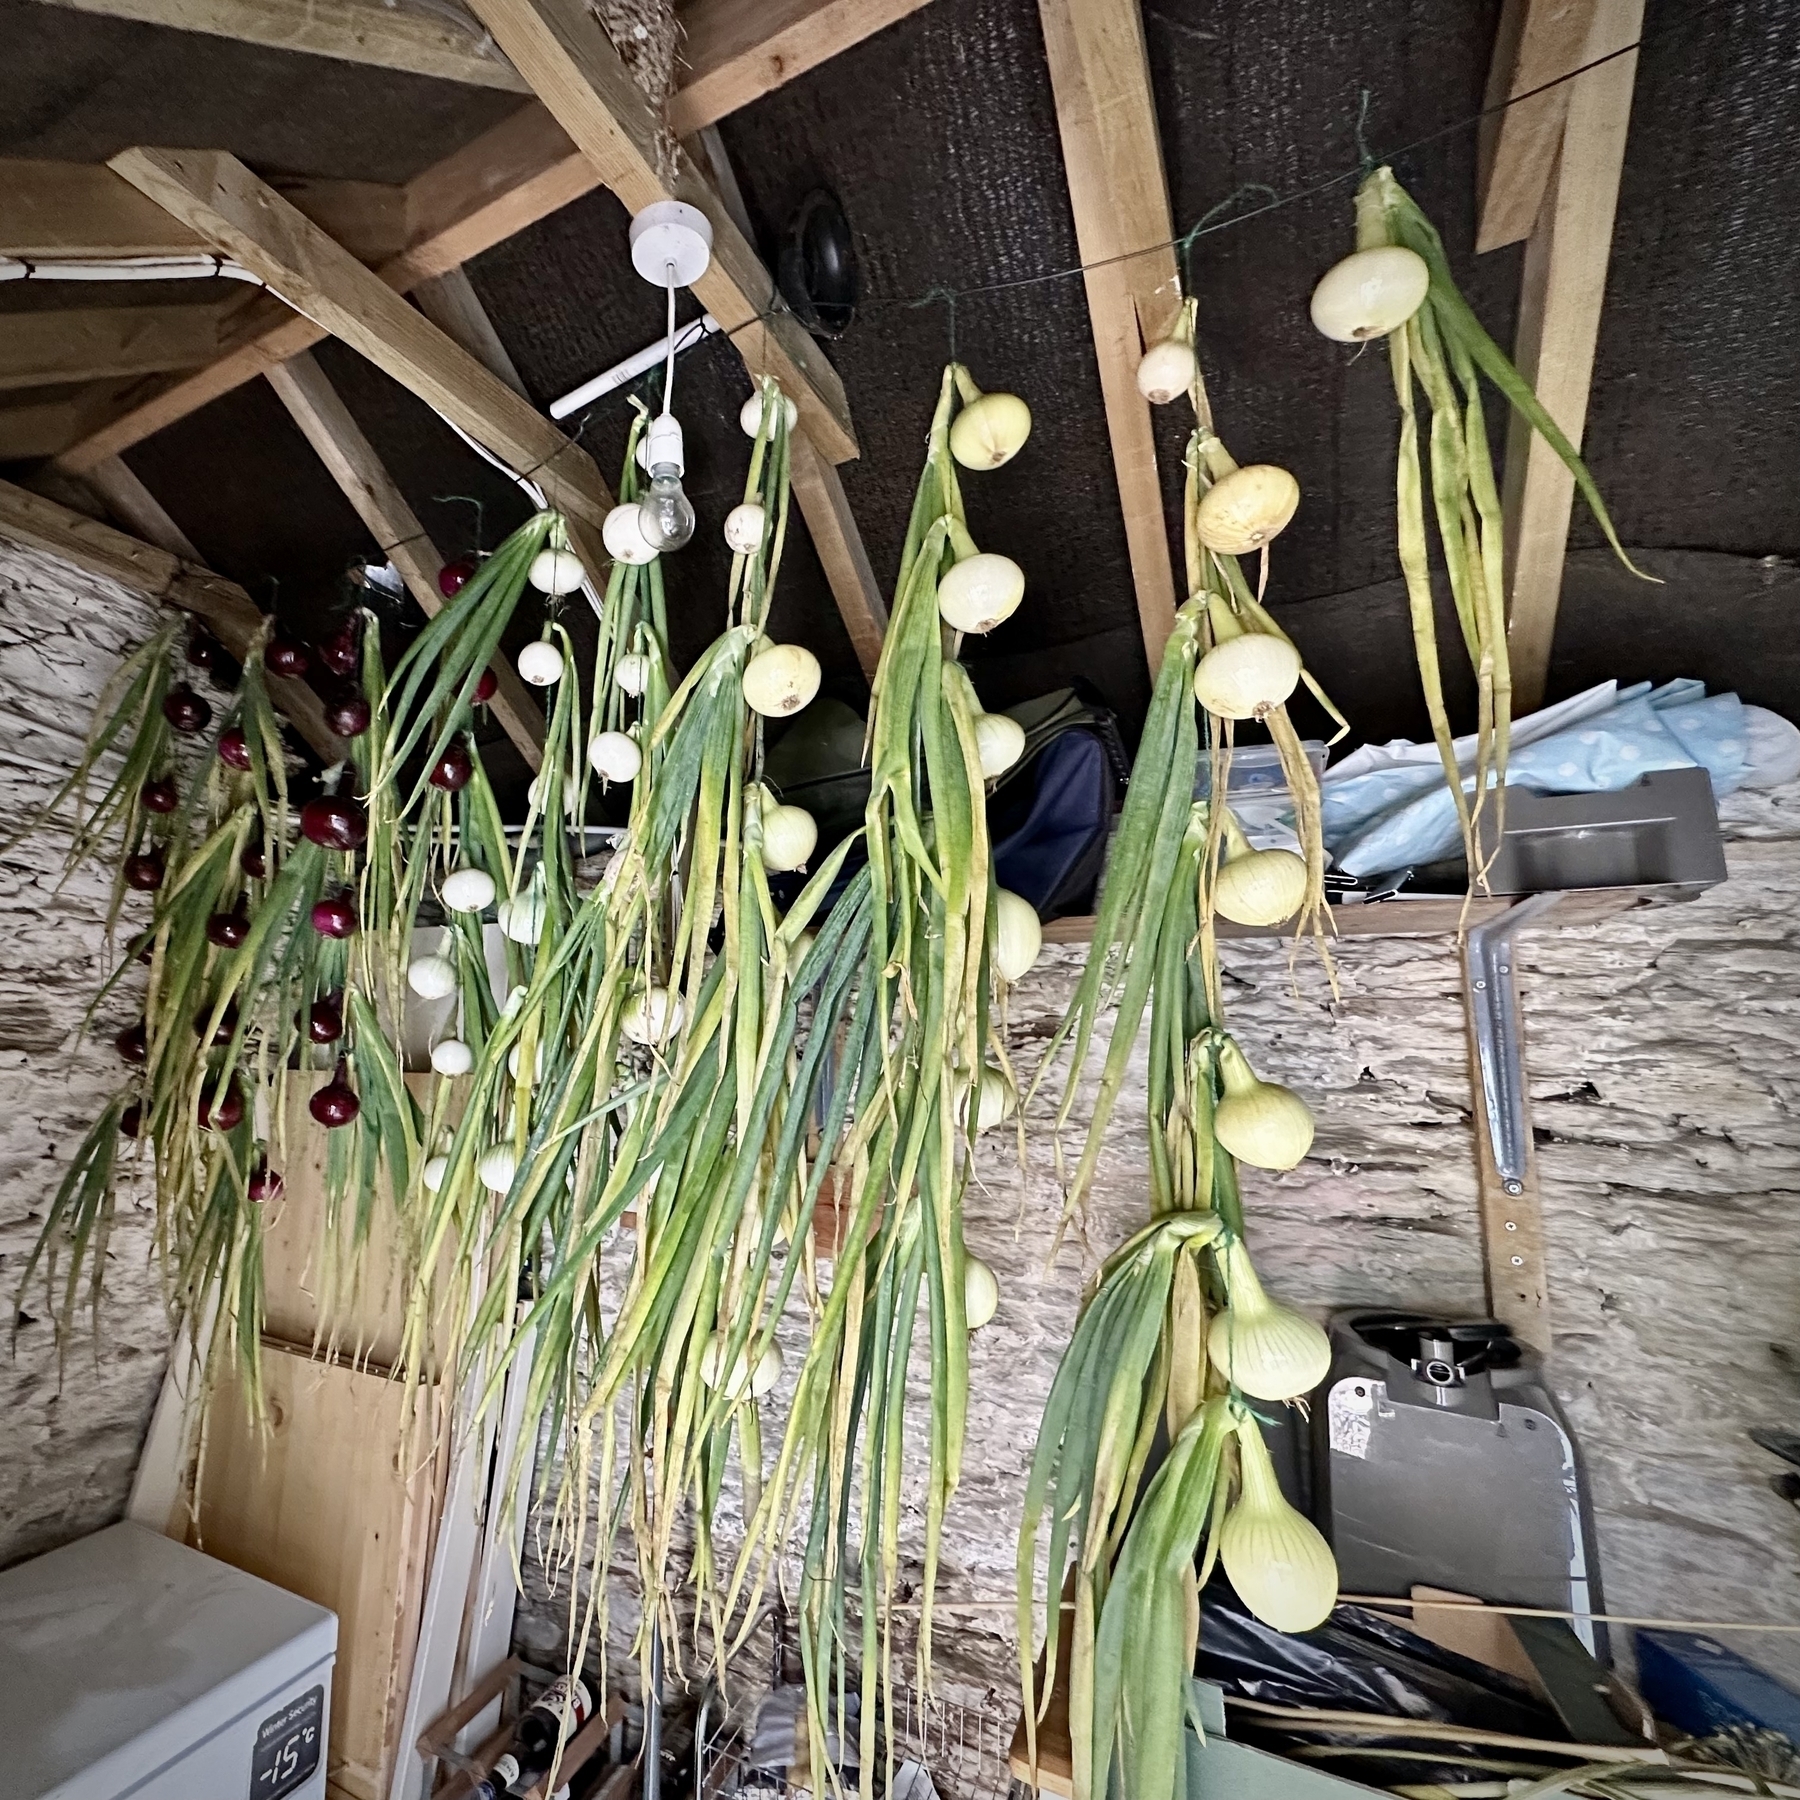 photo of onions hanging on string